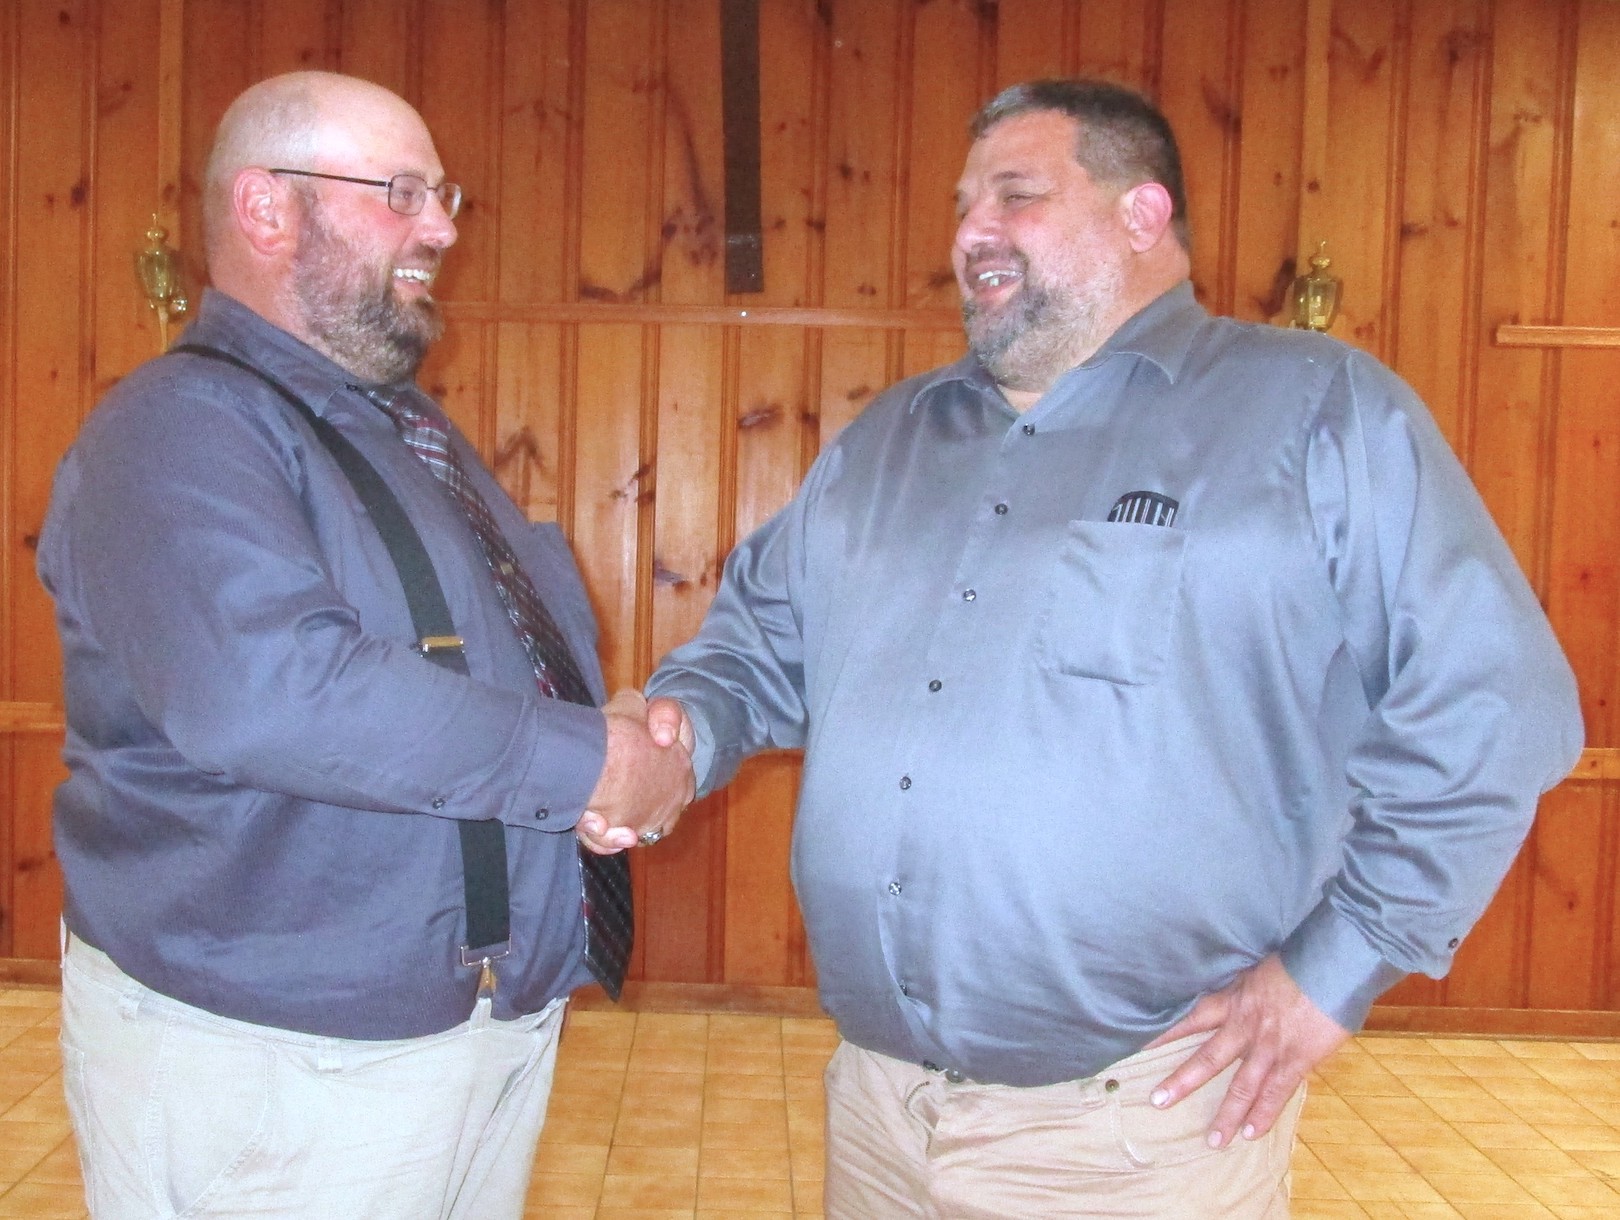 Niagara County Farm Bureau President Kevin Bittner is congratulated by NY Farm Bureau District 2 Director Pat McCormick. (Submitted photo)